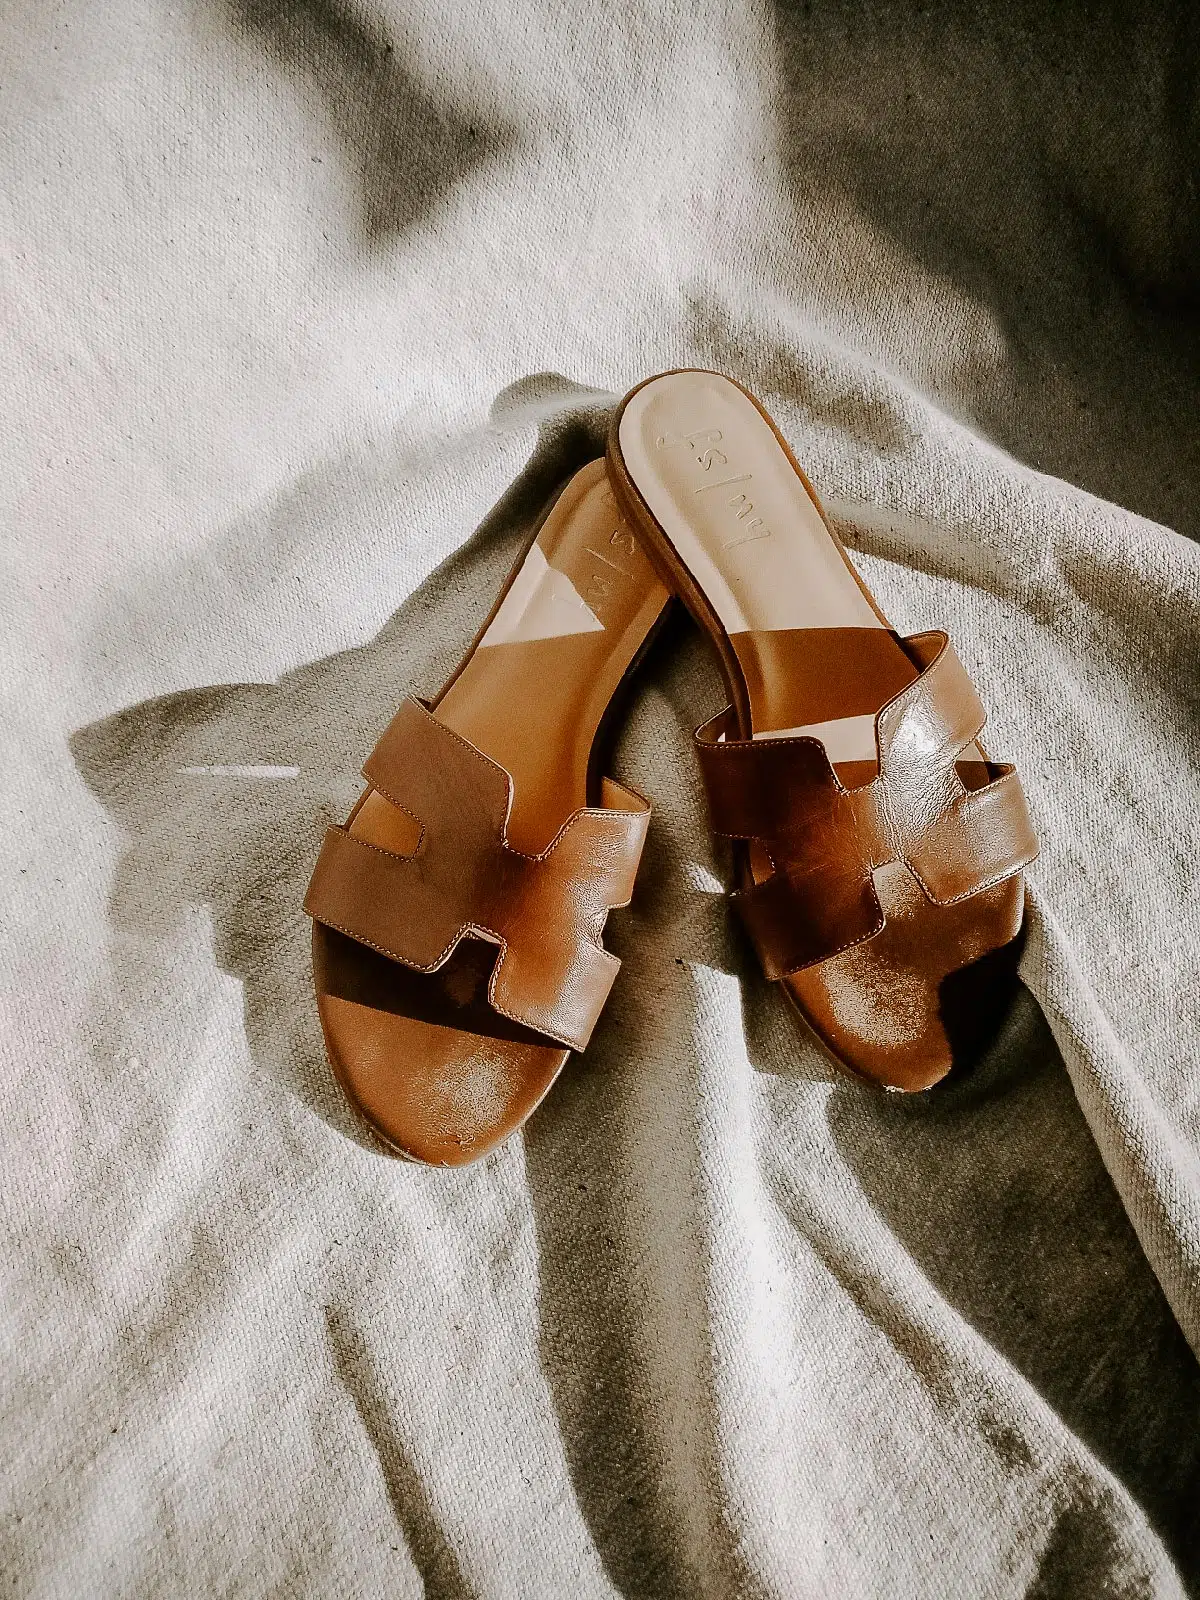 french sole alibi sandal 6 months later